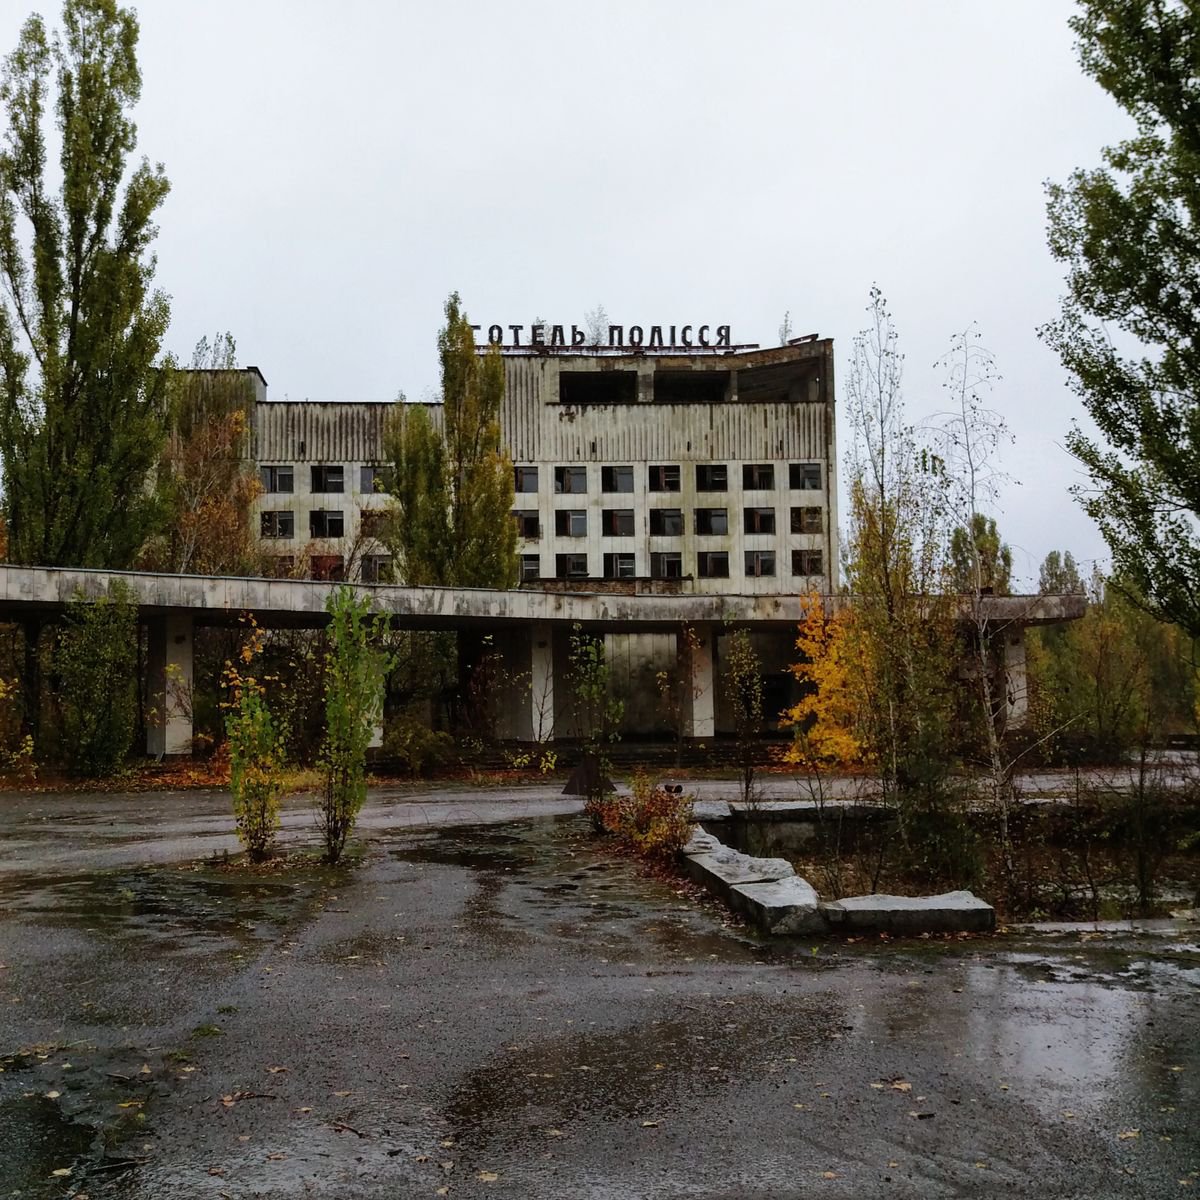 Chernobyl, 14x14 Inches, C-Type, Unframed by Amadeus Long